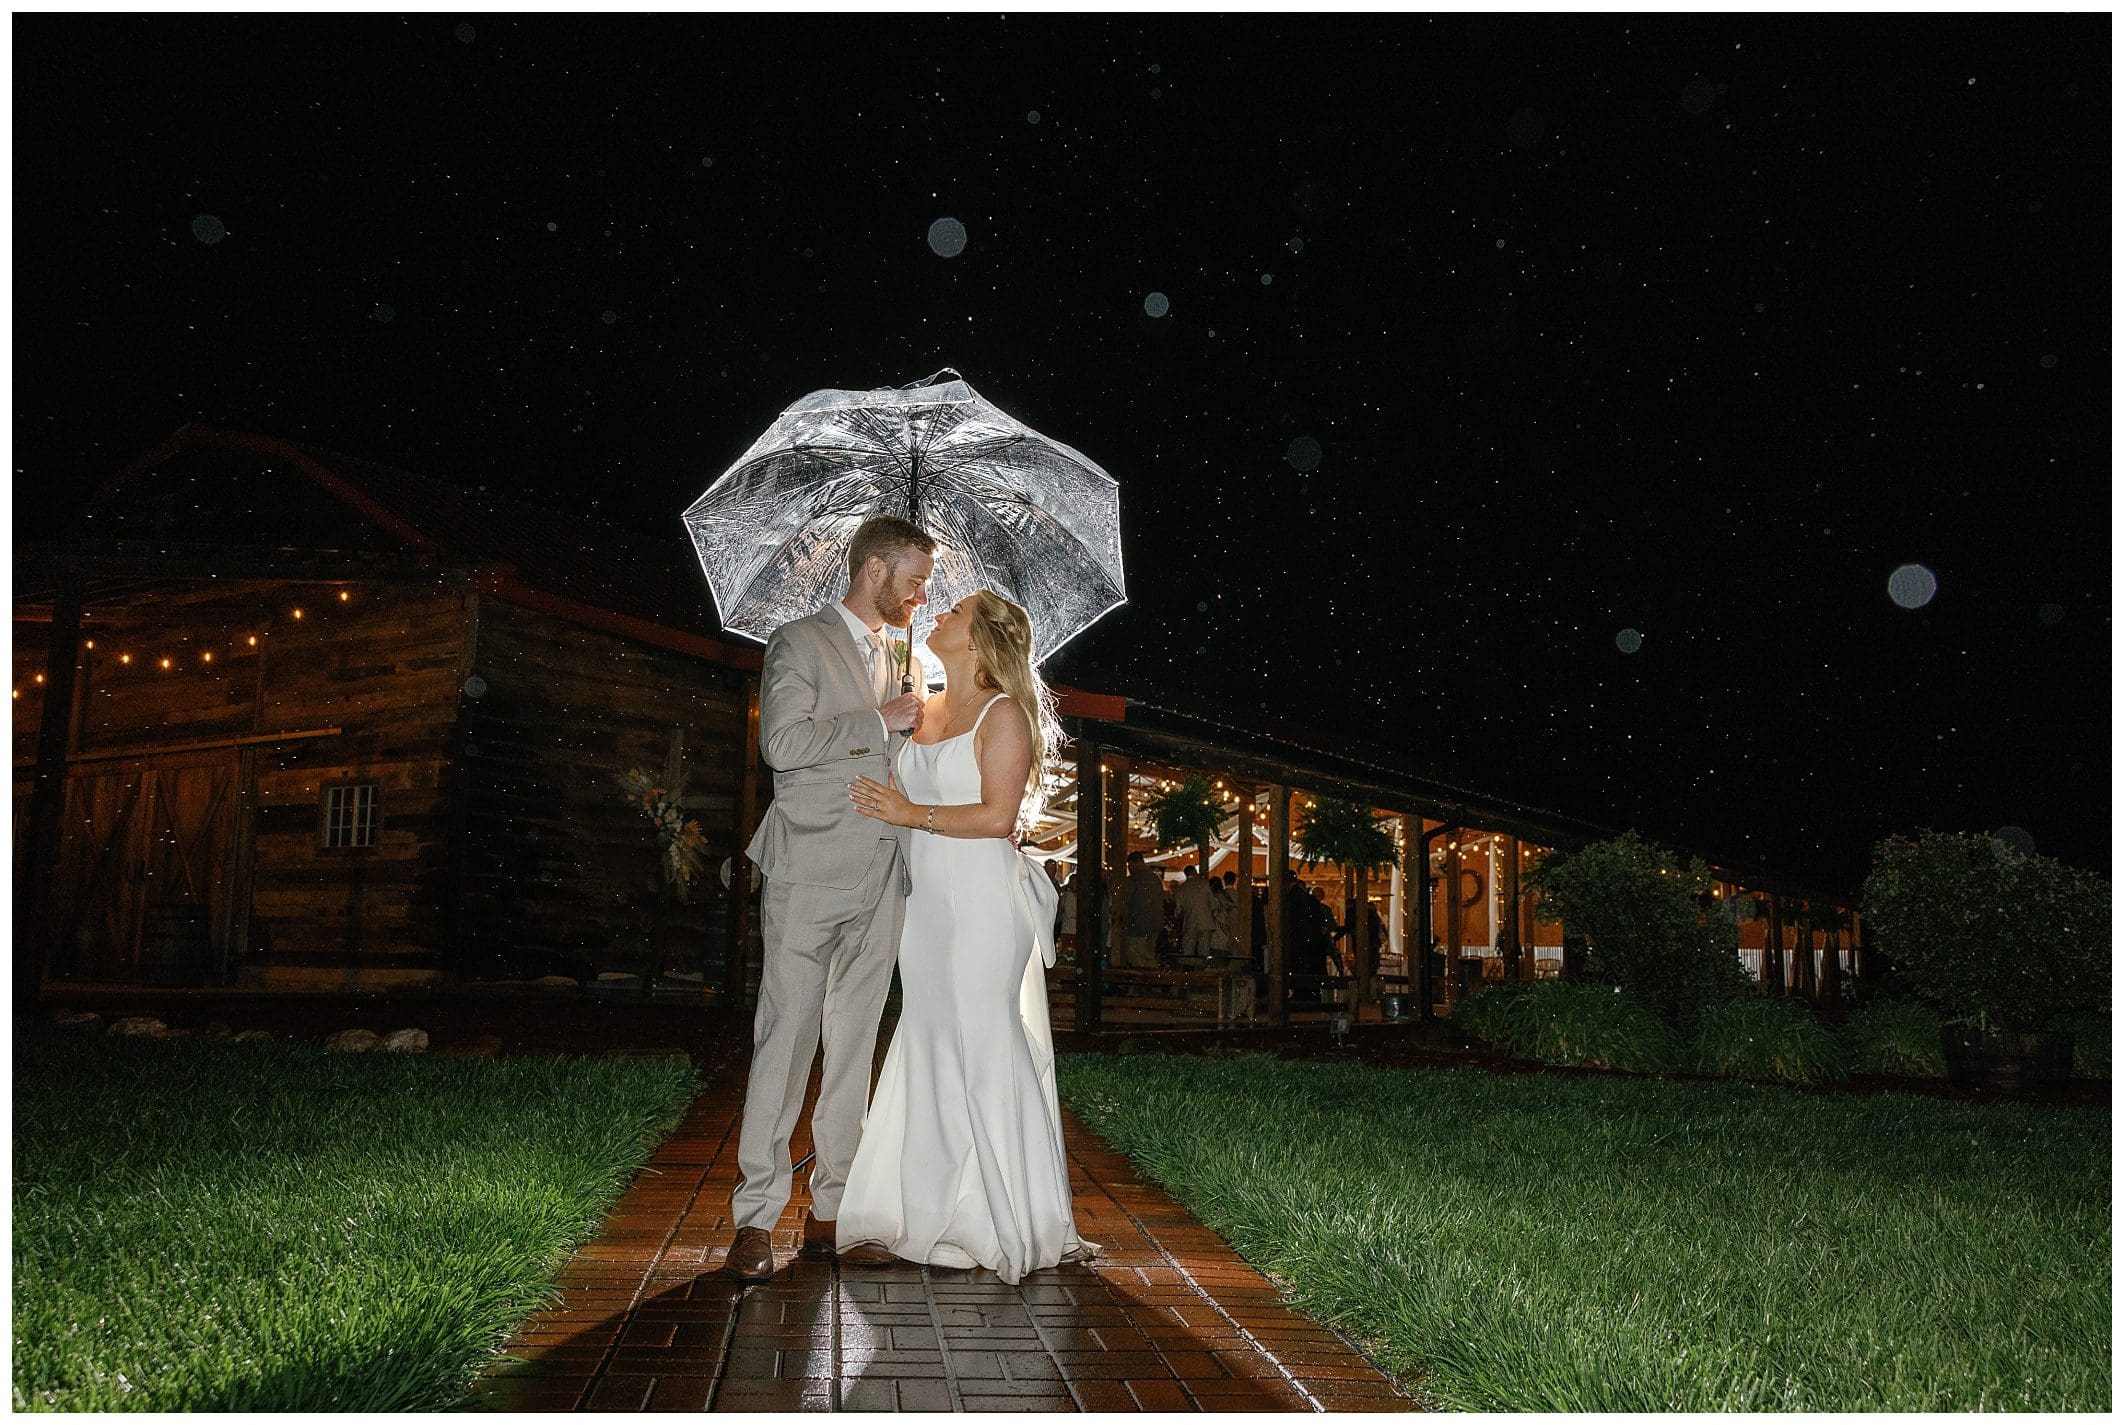 night photo of the bride and groom under. an umbrella at their rainy wedding day